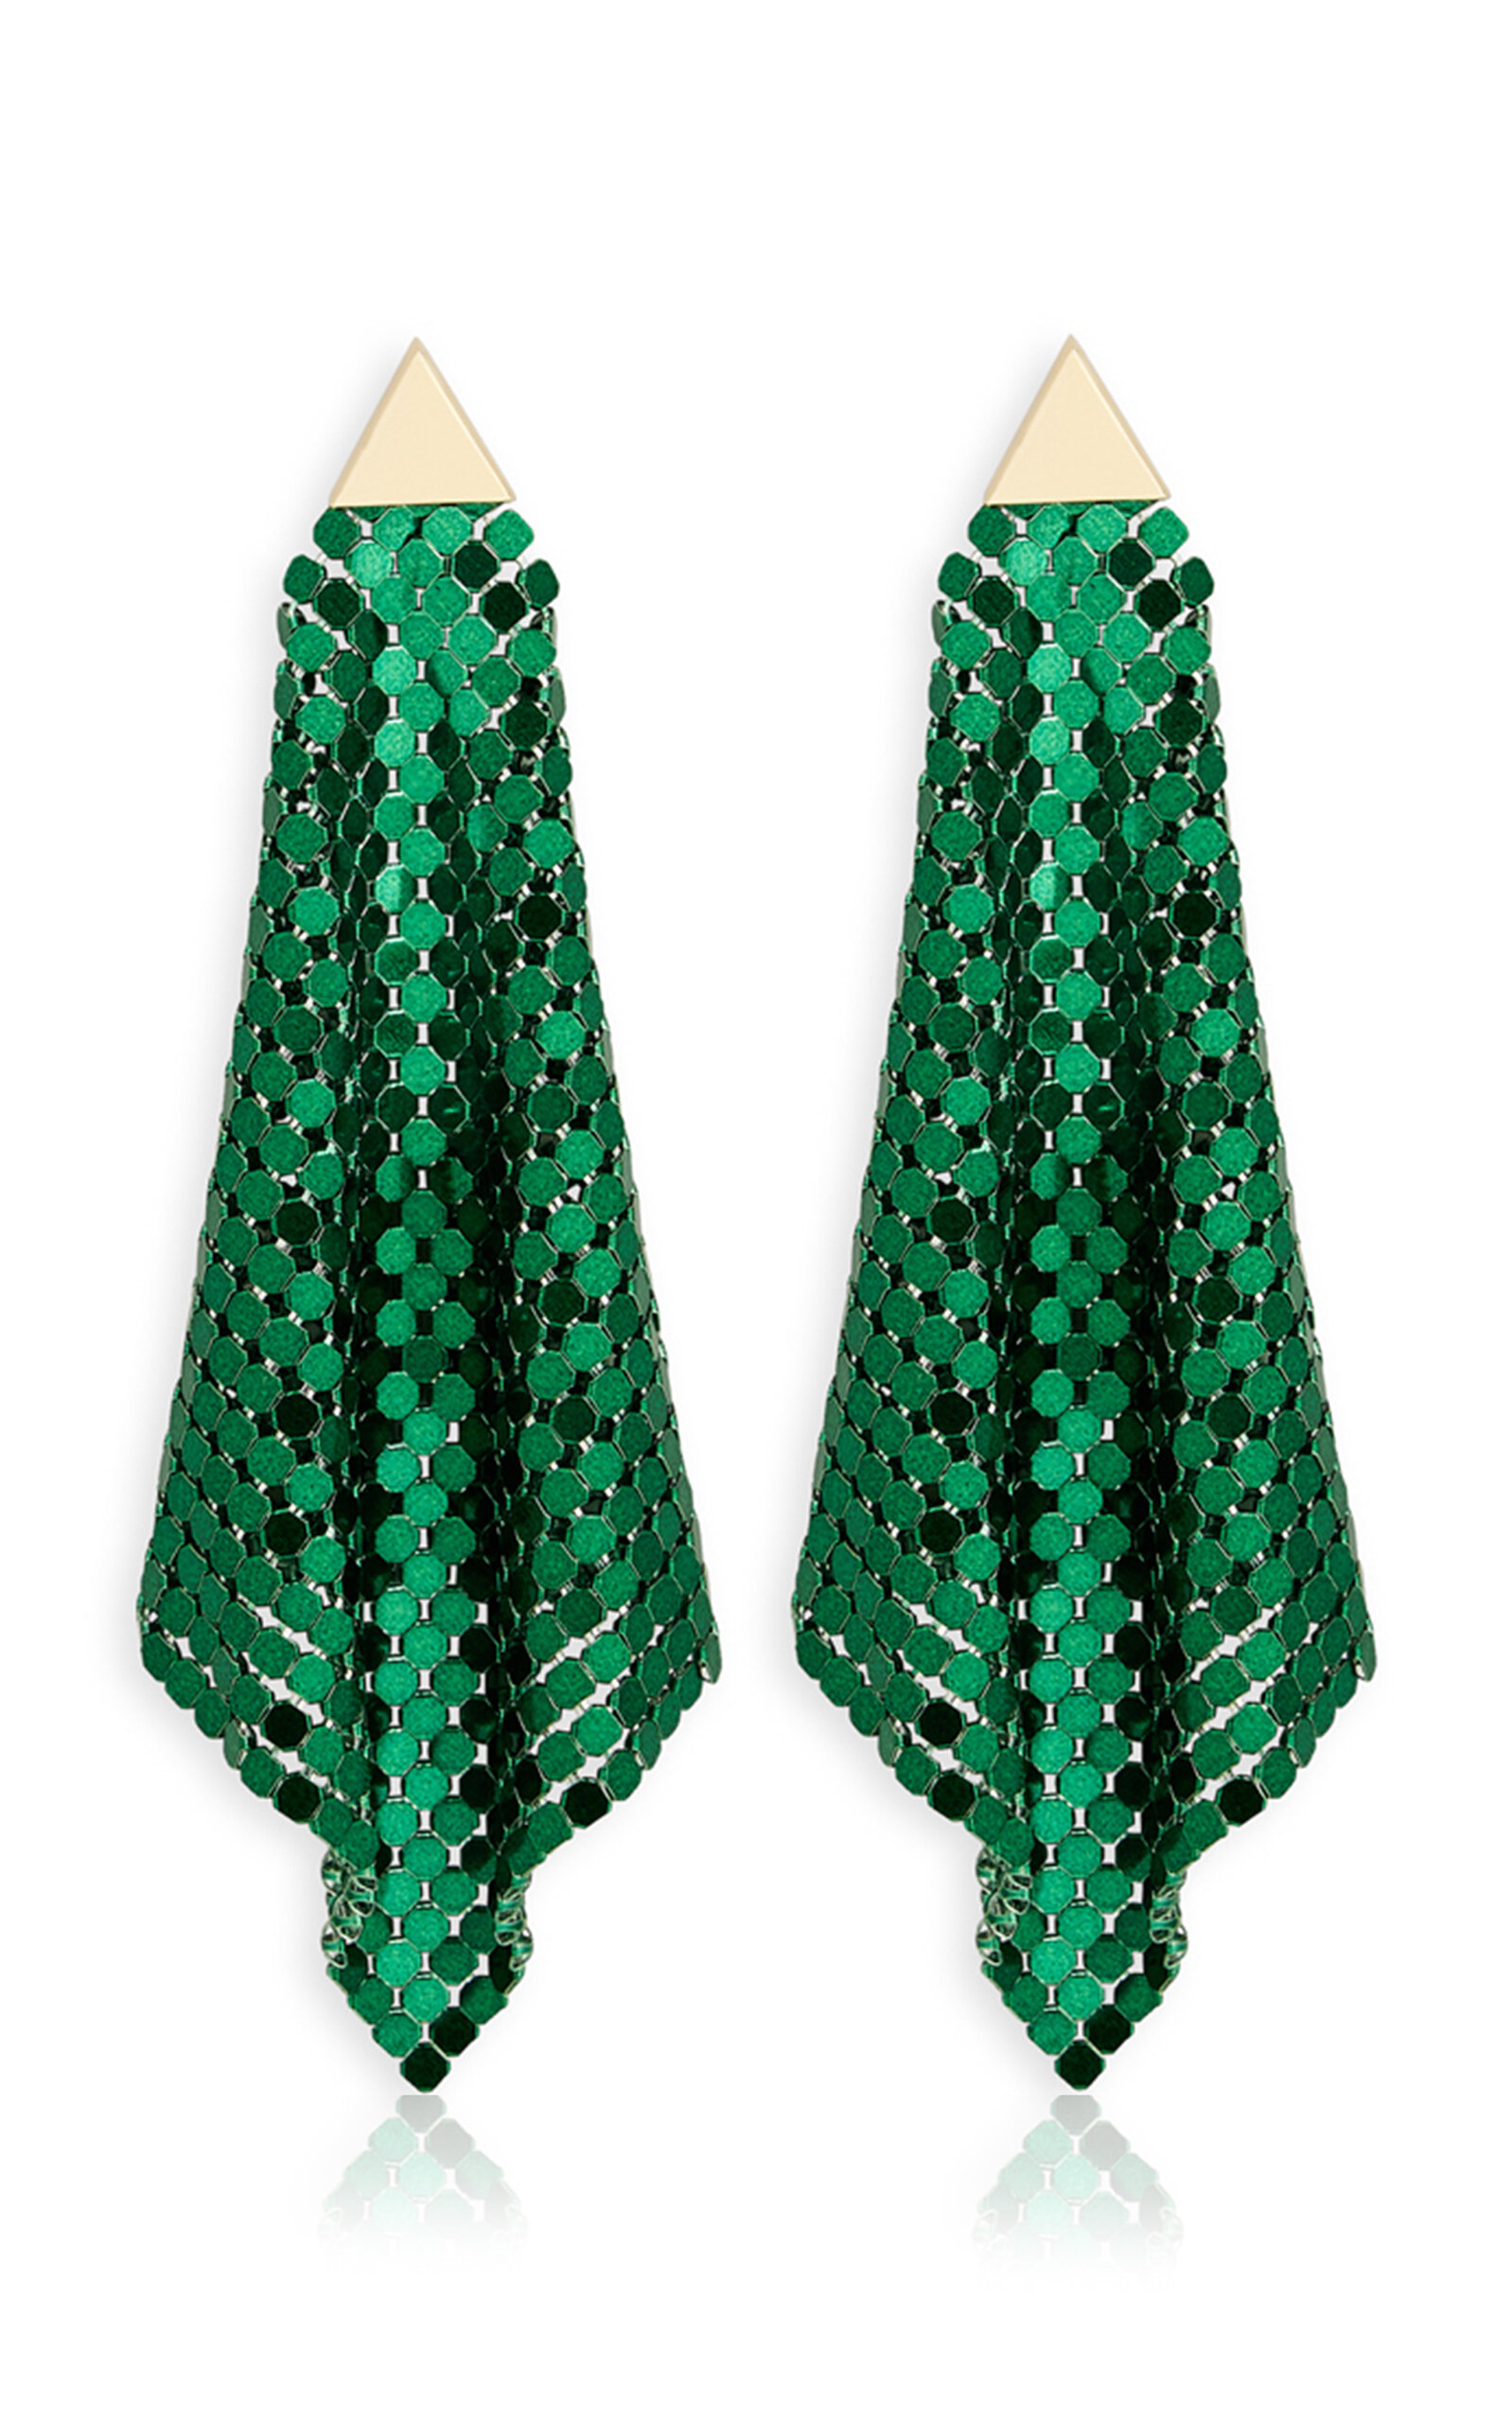 Paco Rabanne - Pixel Flow Gold-Tone Chainmail Earrings - Green - OS - Moda Operandi - Gifts For Her